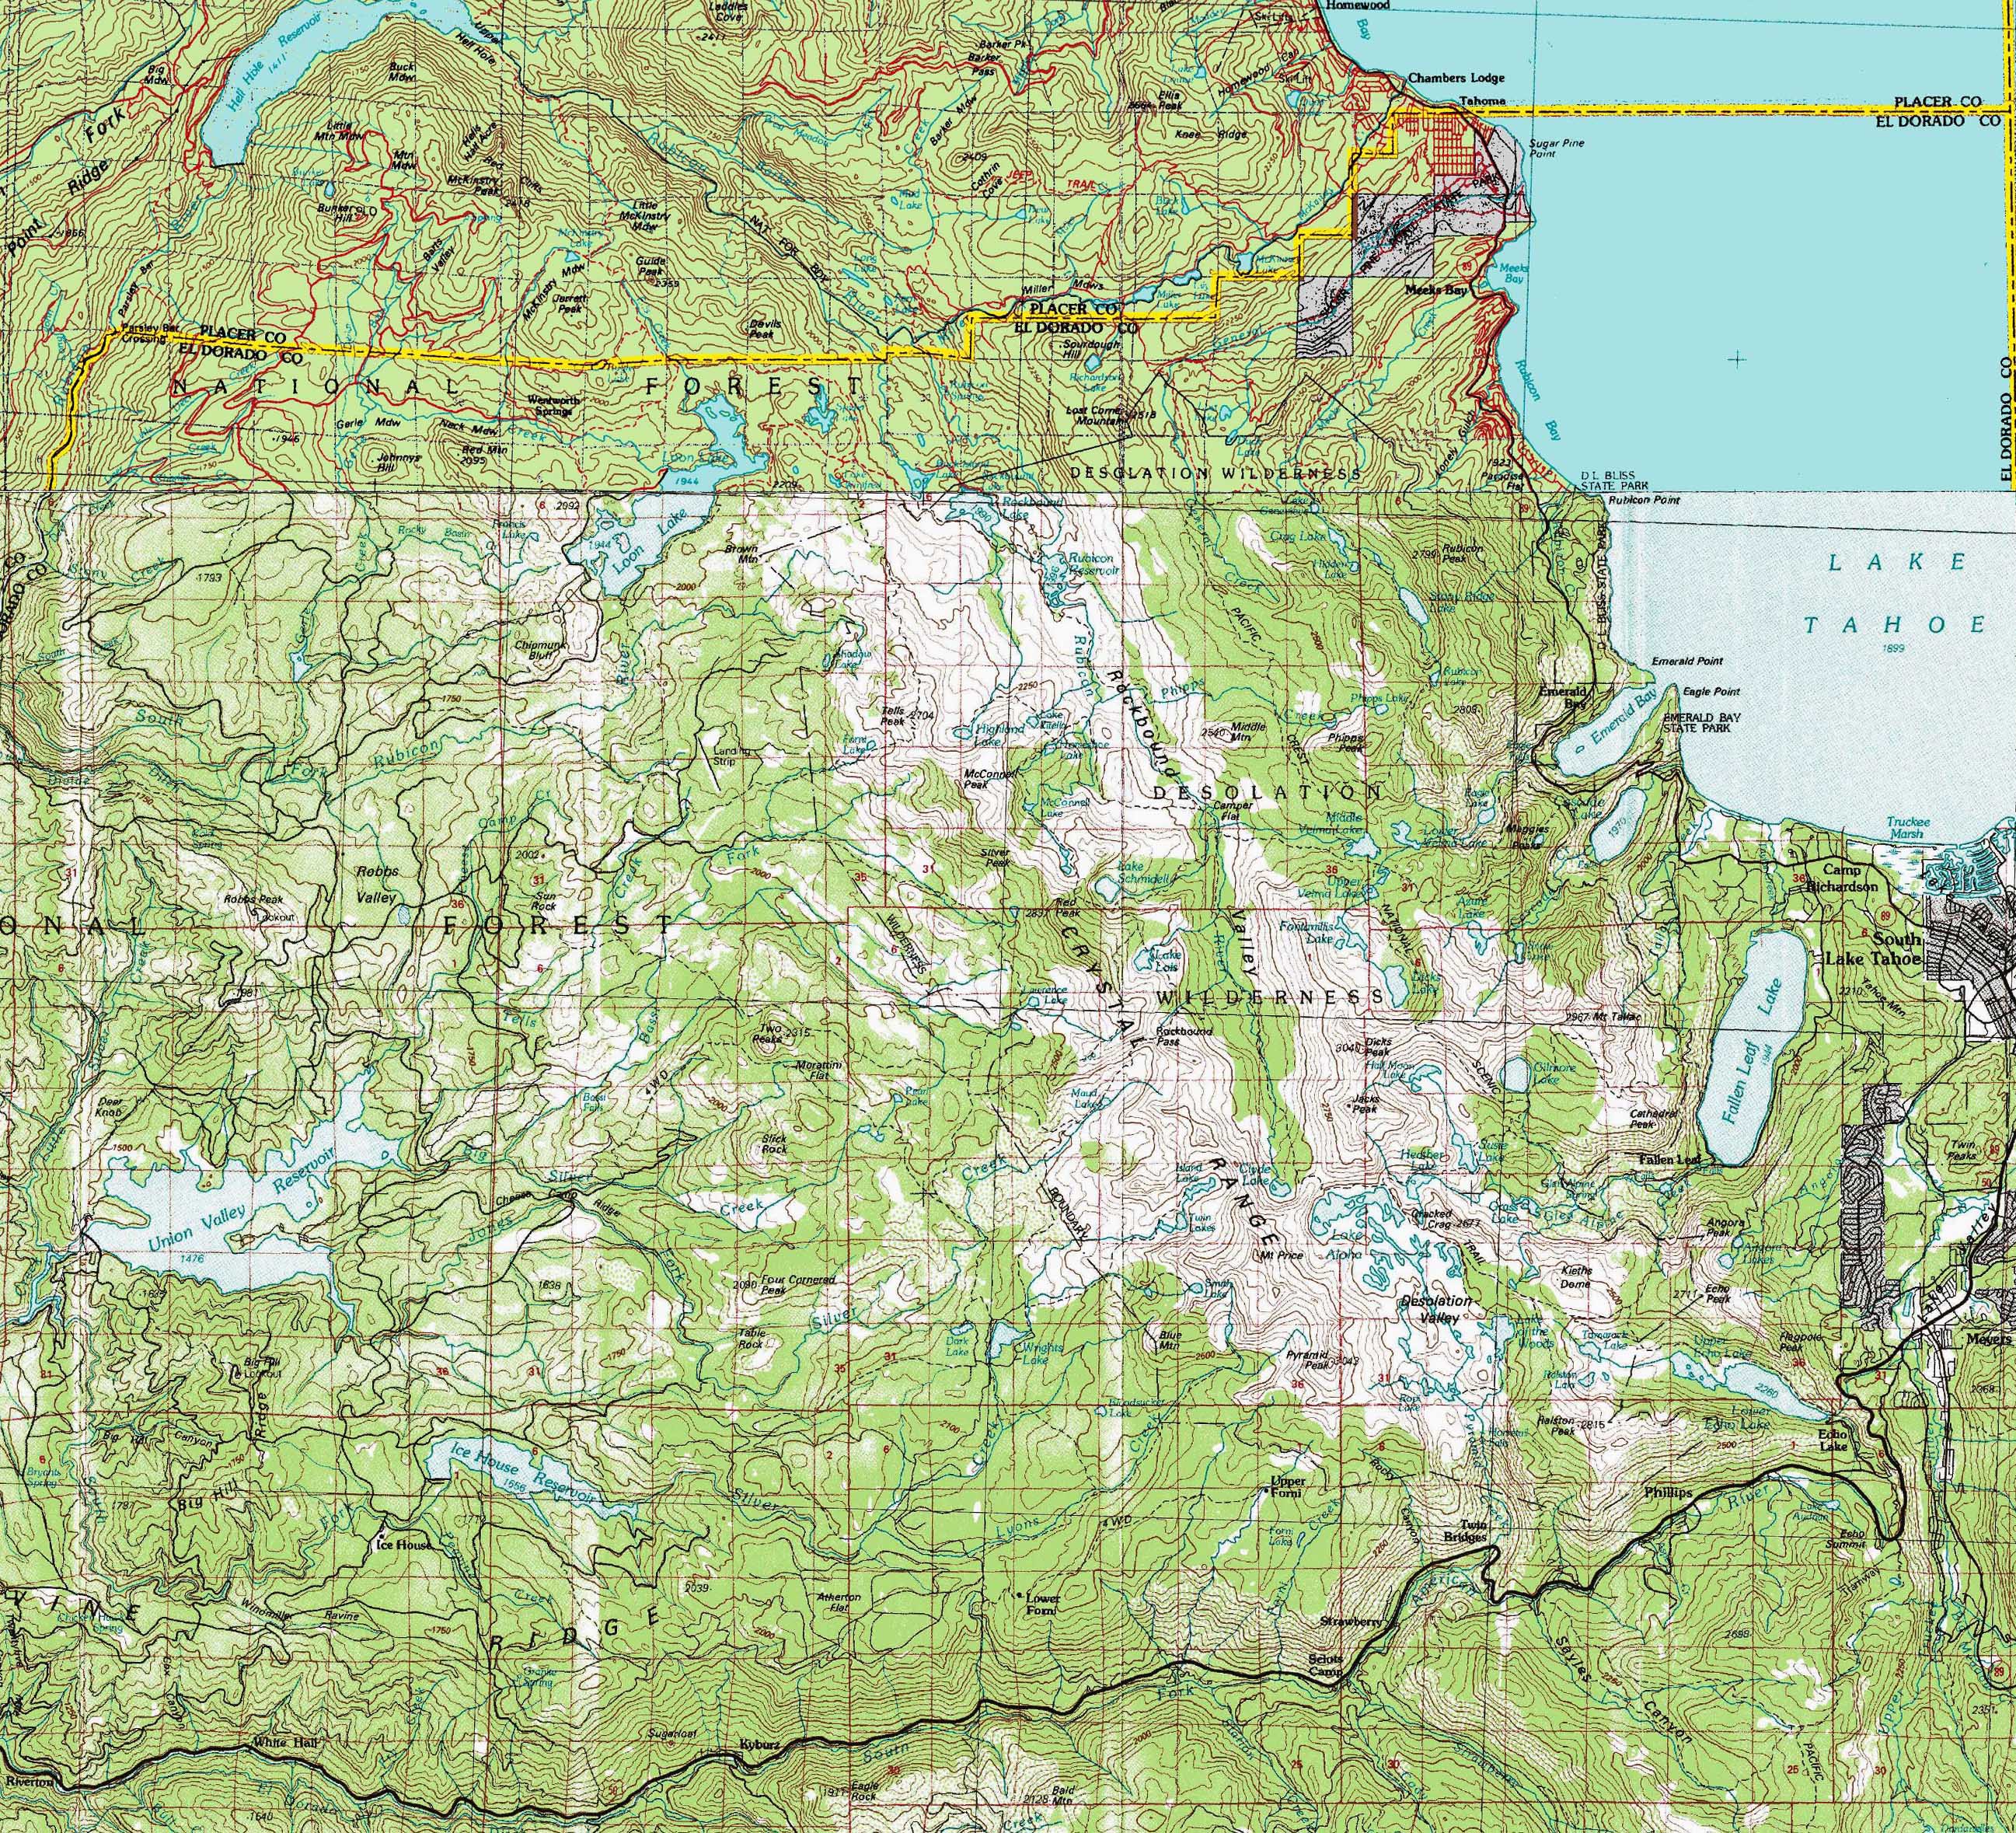 Complete Desolation Wilderness topographic backpacking map.